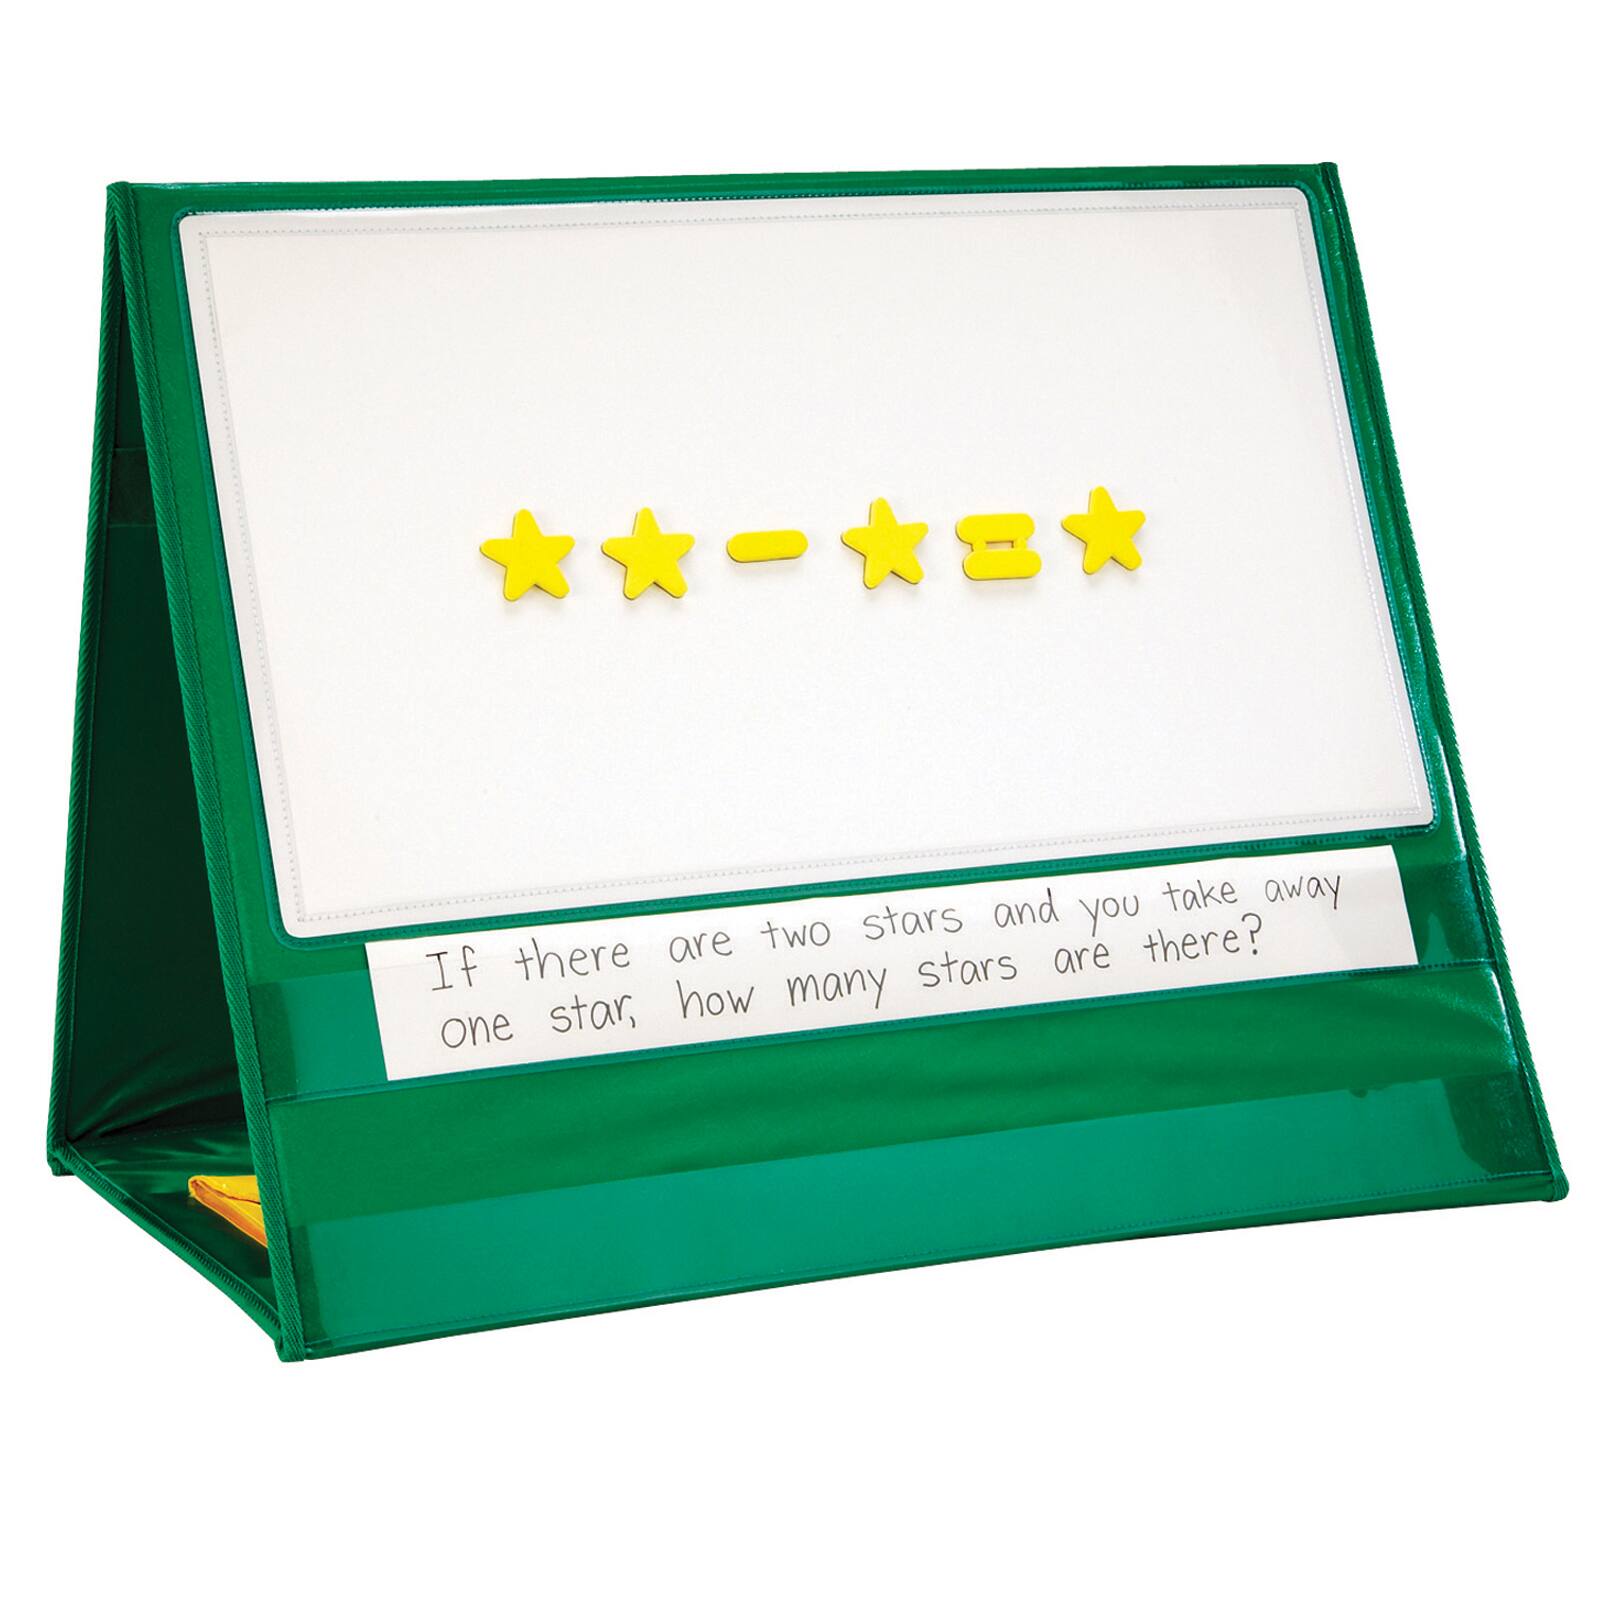 Find the Write-On/Wipe-Off Magnetic Demonstration Tabletop Pocket Chart at Michaels